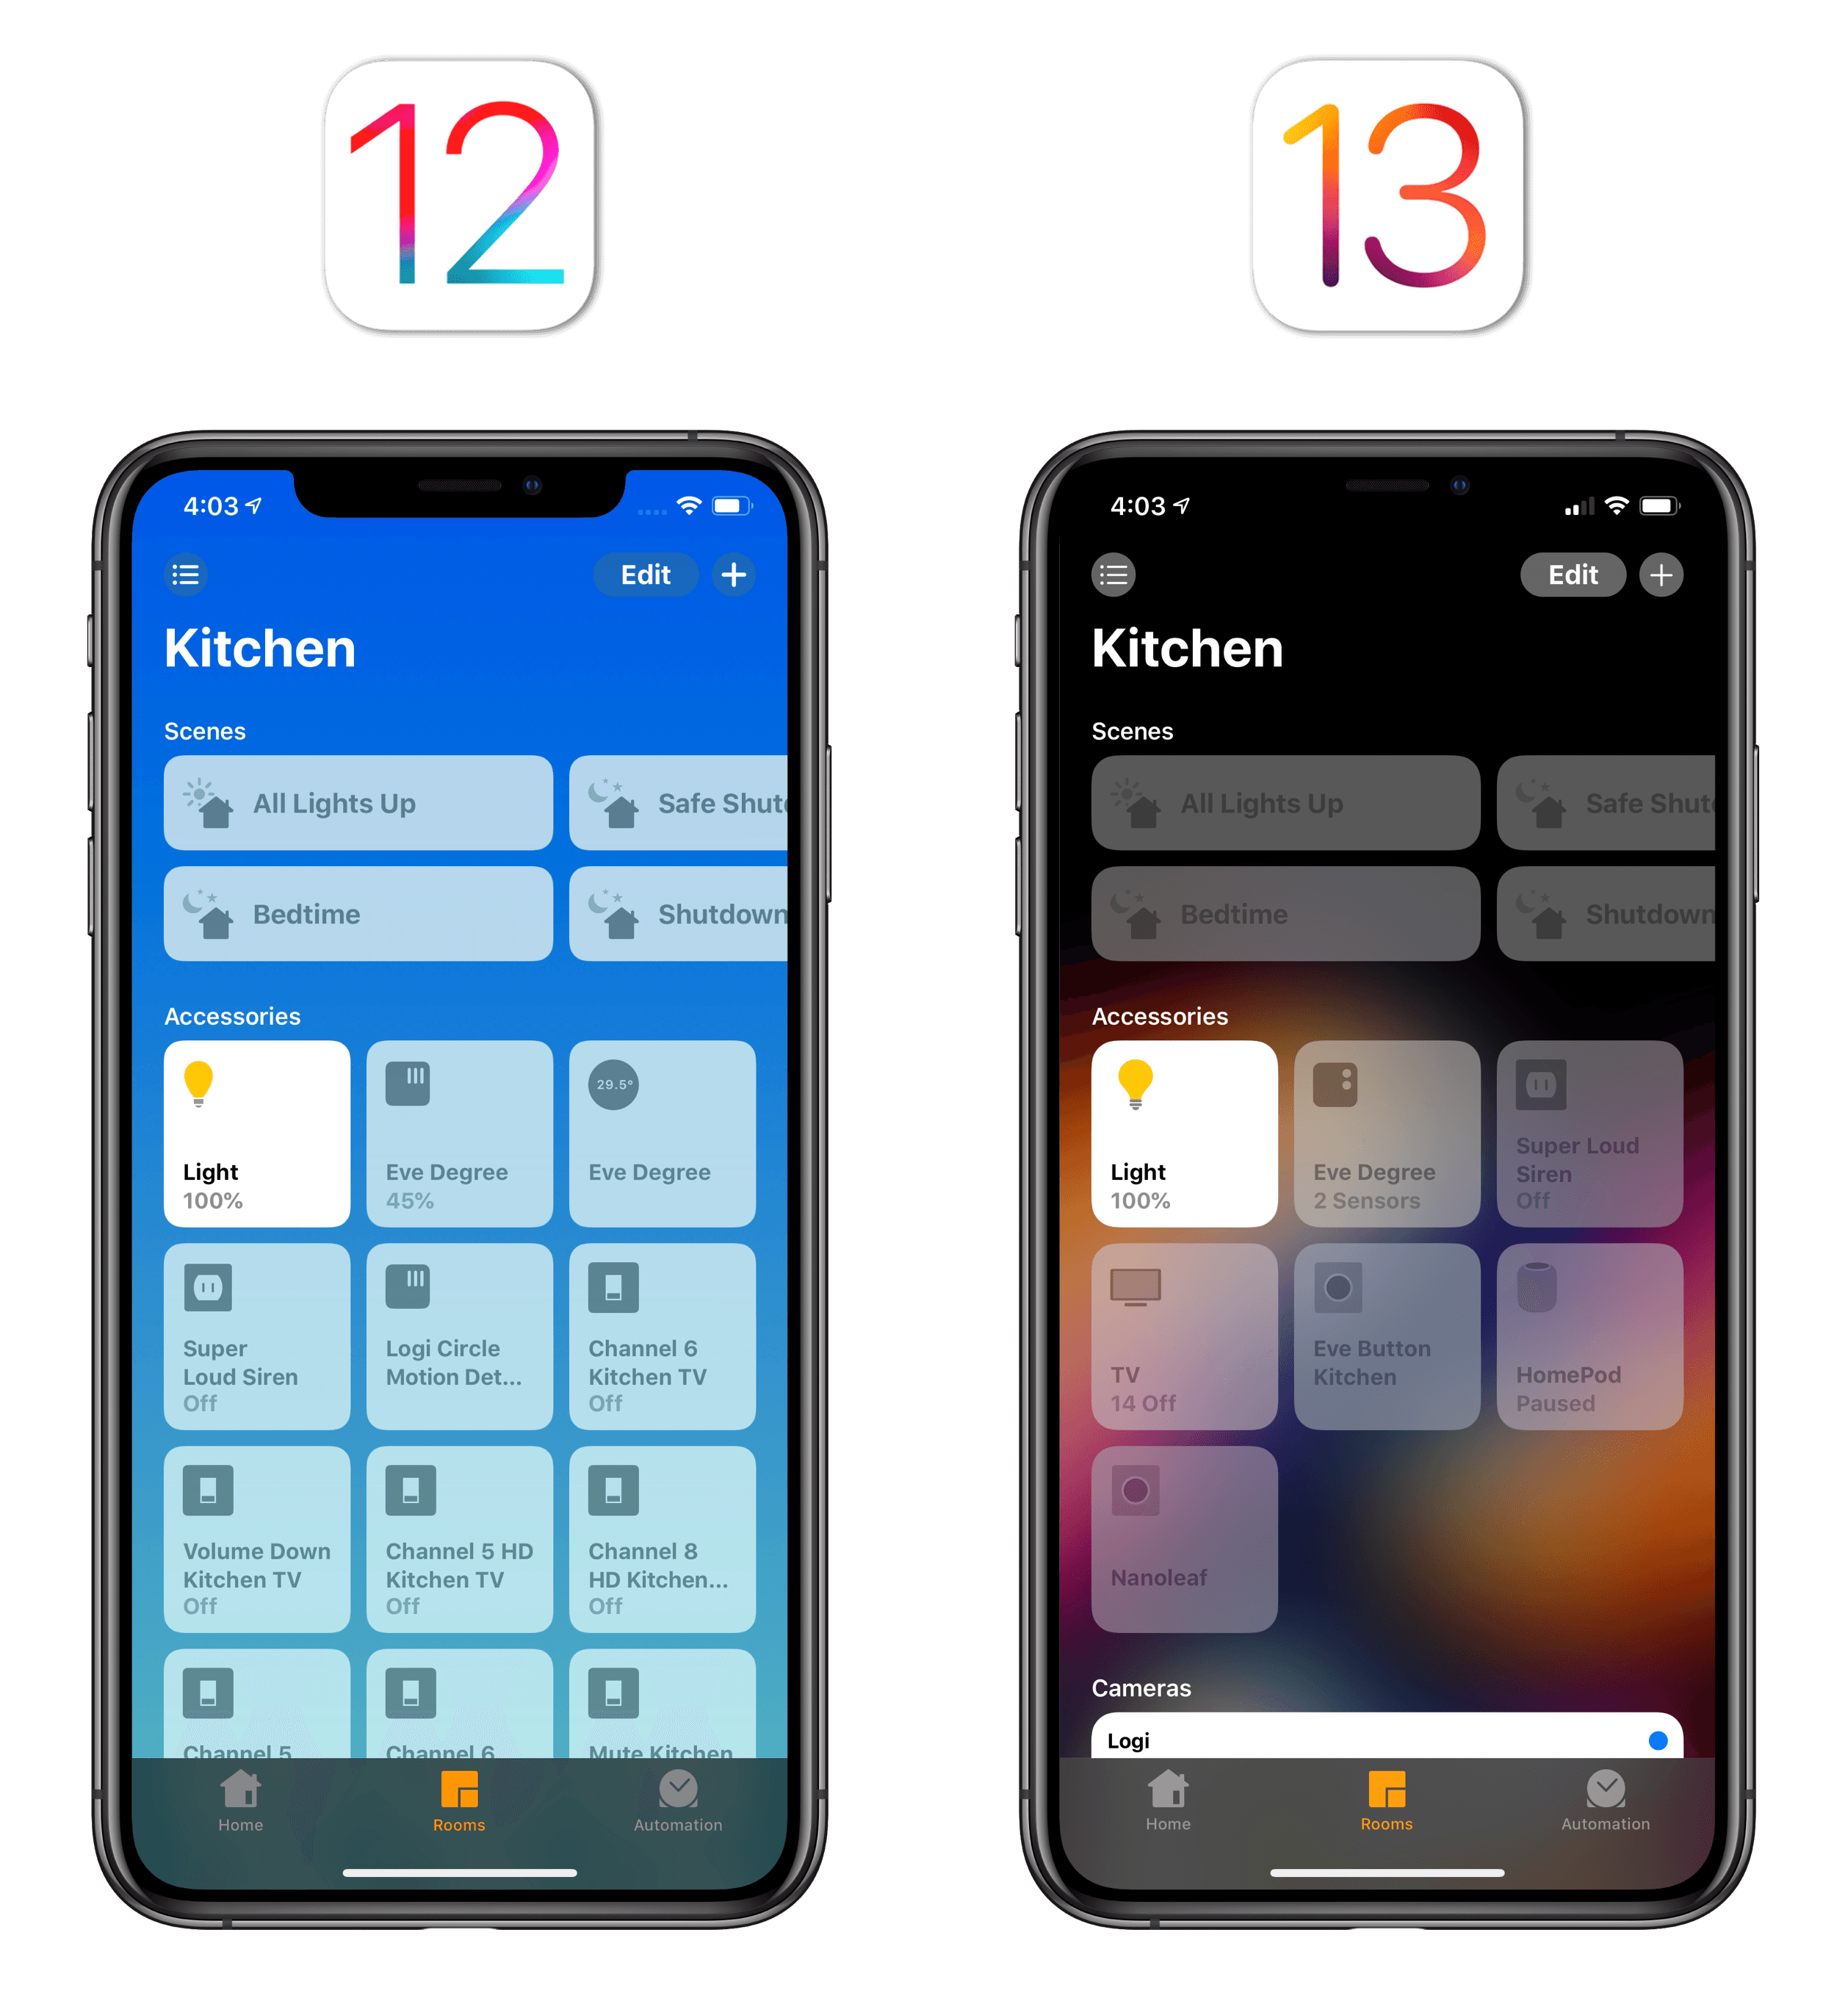 Service grouping in iOS 13.